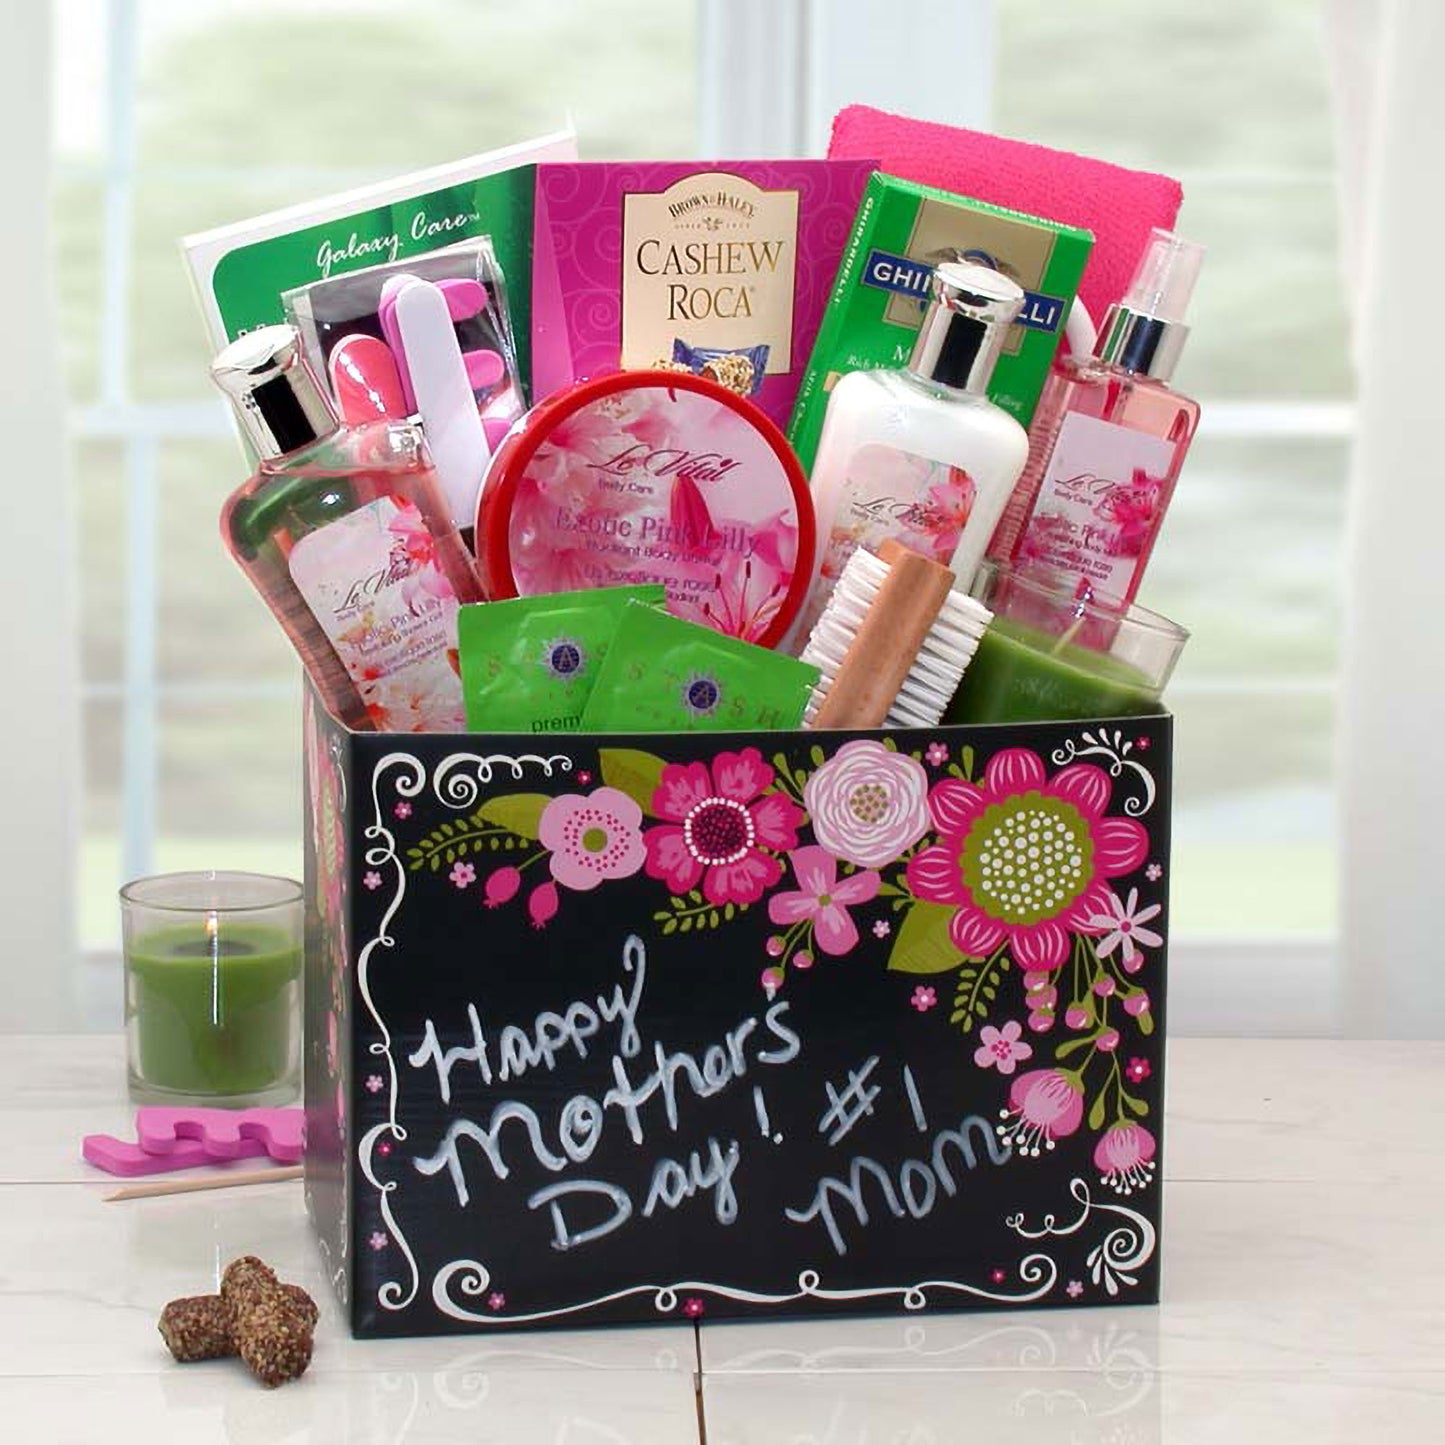 Happy Mother's Day Exotic Lily Spa Gift Box